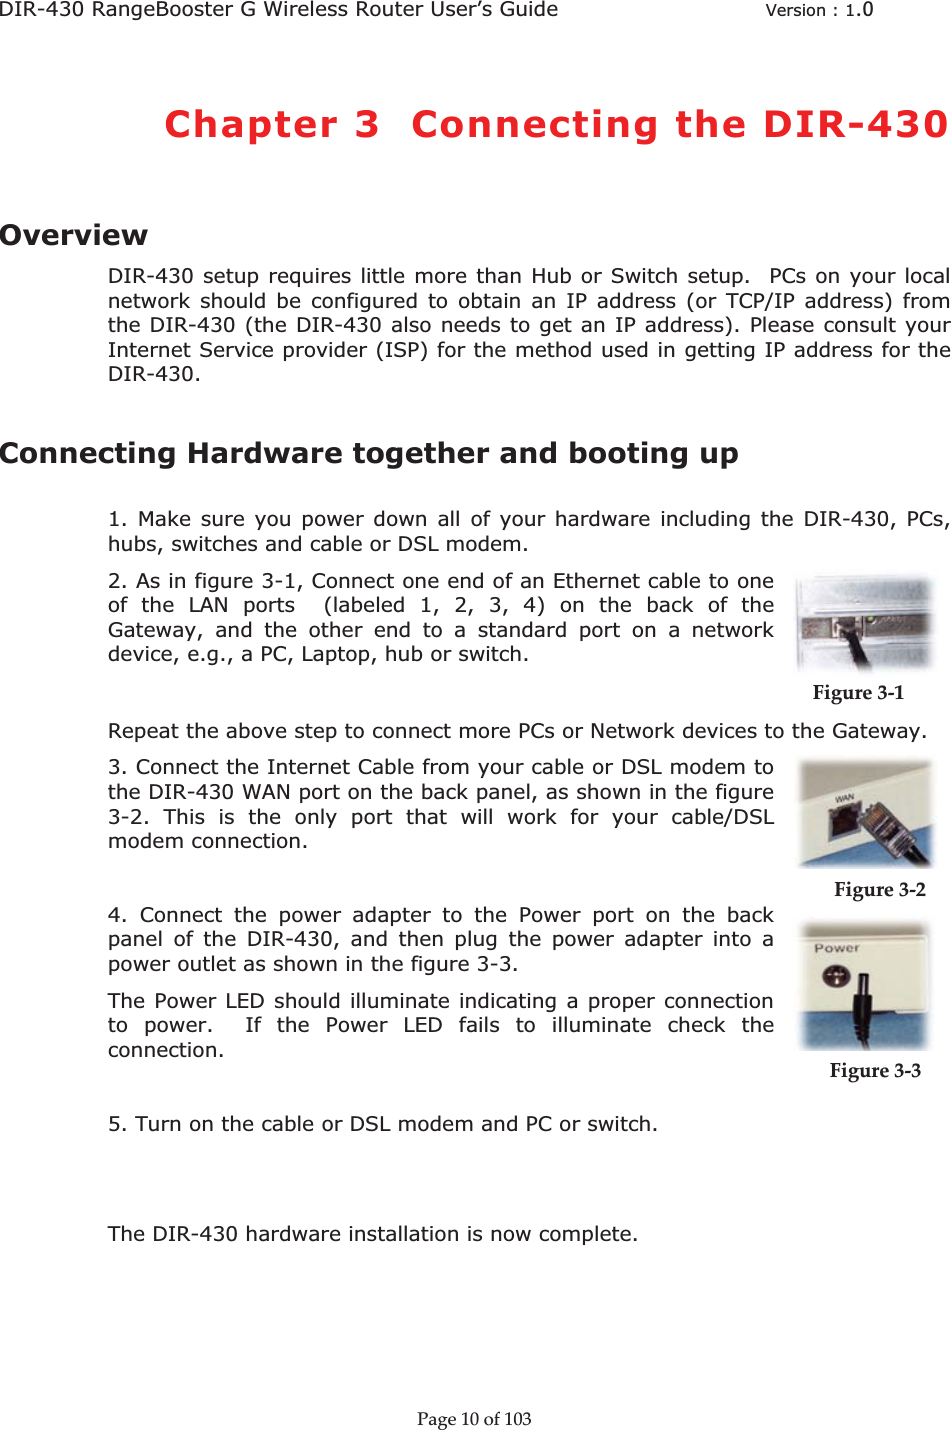 DIR-430 RangeBooster G Wireless Router User’s Guide  Version : 1.0ȱChapter 3  Connecting the DIR-430OverviewDIR-430 setup requires little more than Hub or Switch setup.  PCs on your local network should be configured to obtain an IP address (or TCP/IP address) from the DIR-430 (the DIR-430 also needs to get an IP address). Please consult your Internet Service provider (ISP) for the method used in getting IP address for the DIR-430.Connecting Hardware together and booting up  1. Make sure you power down all of your hardware including the DIR-430, PCs, hubs, switches and cable or DSL modem. 2. As in figure 3-1, Connect one end of an Ethernet cable to one of the LAN ports  (labeled 1, 2, 3, 4) on the back of the Gateway, and the other end to a standard port on a network device, e.g., a PC, Laptop, hub or switch.     Figureȱ3Ȭ1ȱRepeat the above step to connect more PCs or Network devices to the Gateway.  3. Connect the Internet Cable from your cable or DSL modem to the DIR-430 WAN port on the back panel, as shown in the figure 3-2. This is the only port that will work for your cable/DSL modem connection. 4. Connect the power adapter to the Power port on the back panel of the DIR-430, and then plug the power adapter into a power outlet as shown in the figure 3-3.              Figureȱ3Ȭ2ȱȱȱȱȱȱȱThe Power LED should illuminate indicating a proper connection to power.  If the Power LED fails to illuminate check the connection.               Figureȱ3Ȭ3ȱȱȱȱȱ5. Turn on the cable or DSL modem and PC or switch.  The DIR-430 hardware installation is now complete. Pageȱ10ȱofȱ103ȱ